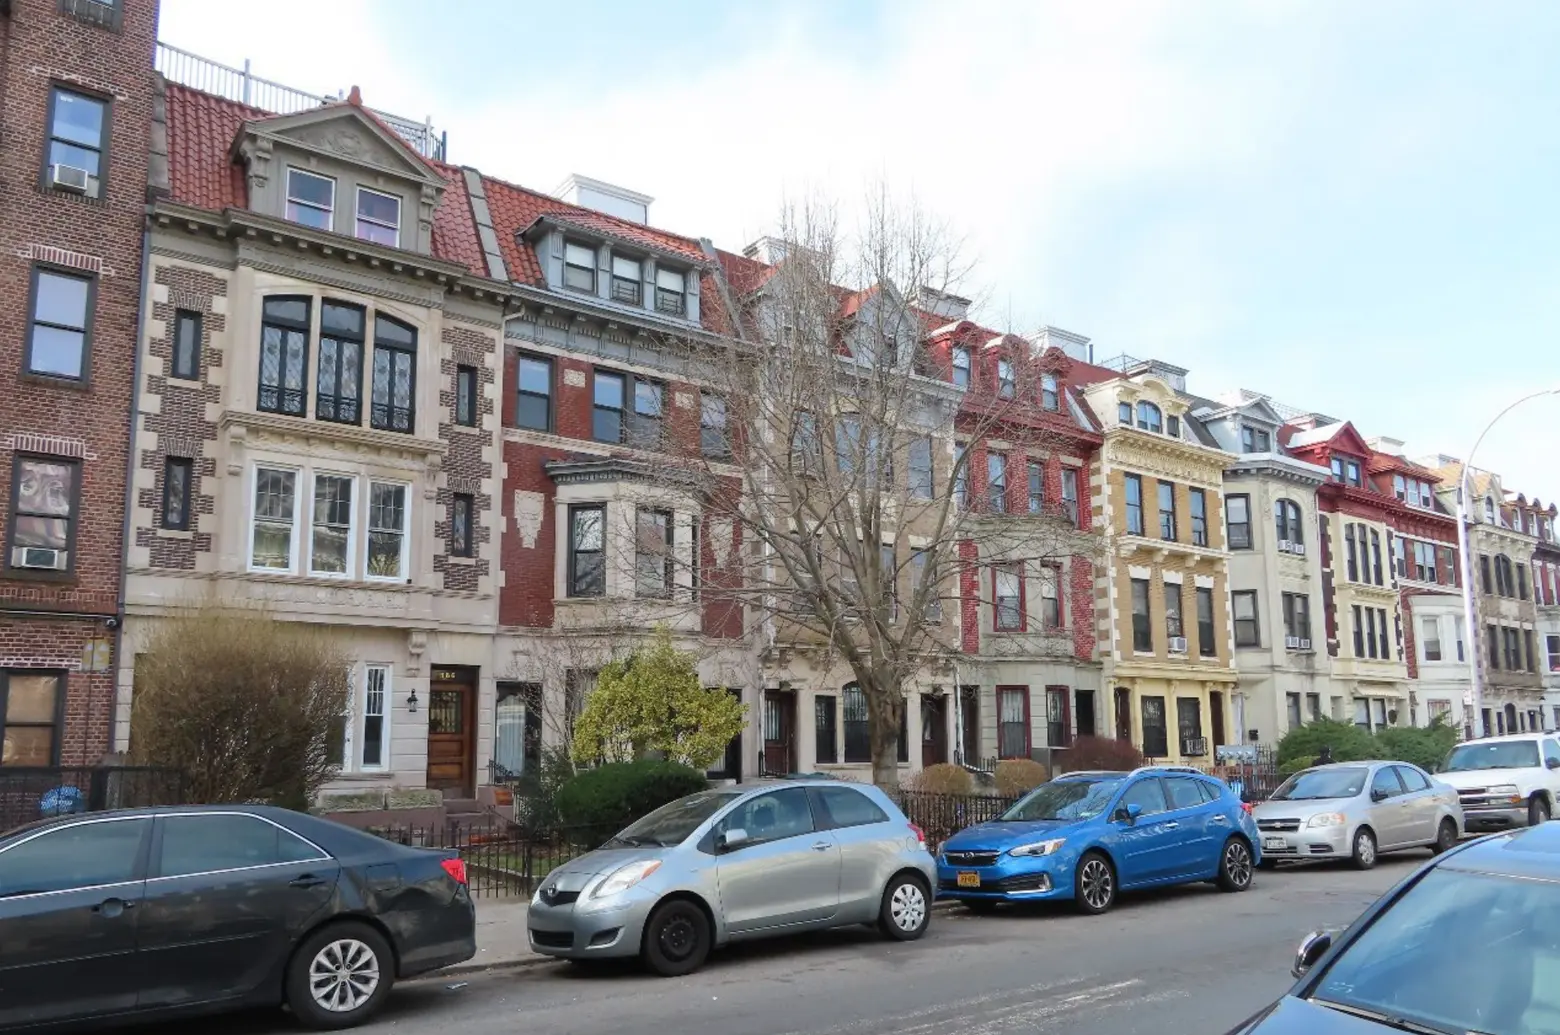 Flatbush block with distinctive homes designed by famous Brooklyn architects may be landmarked